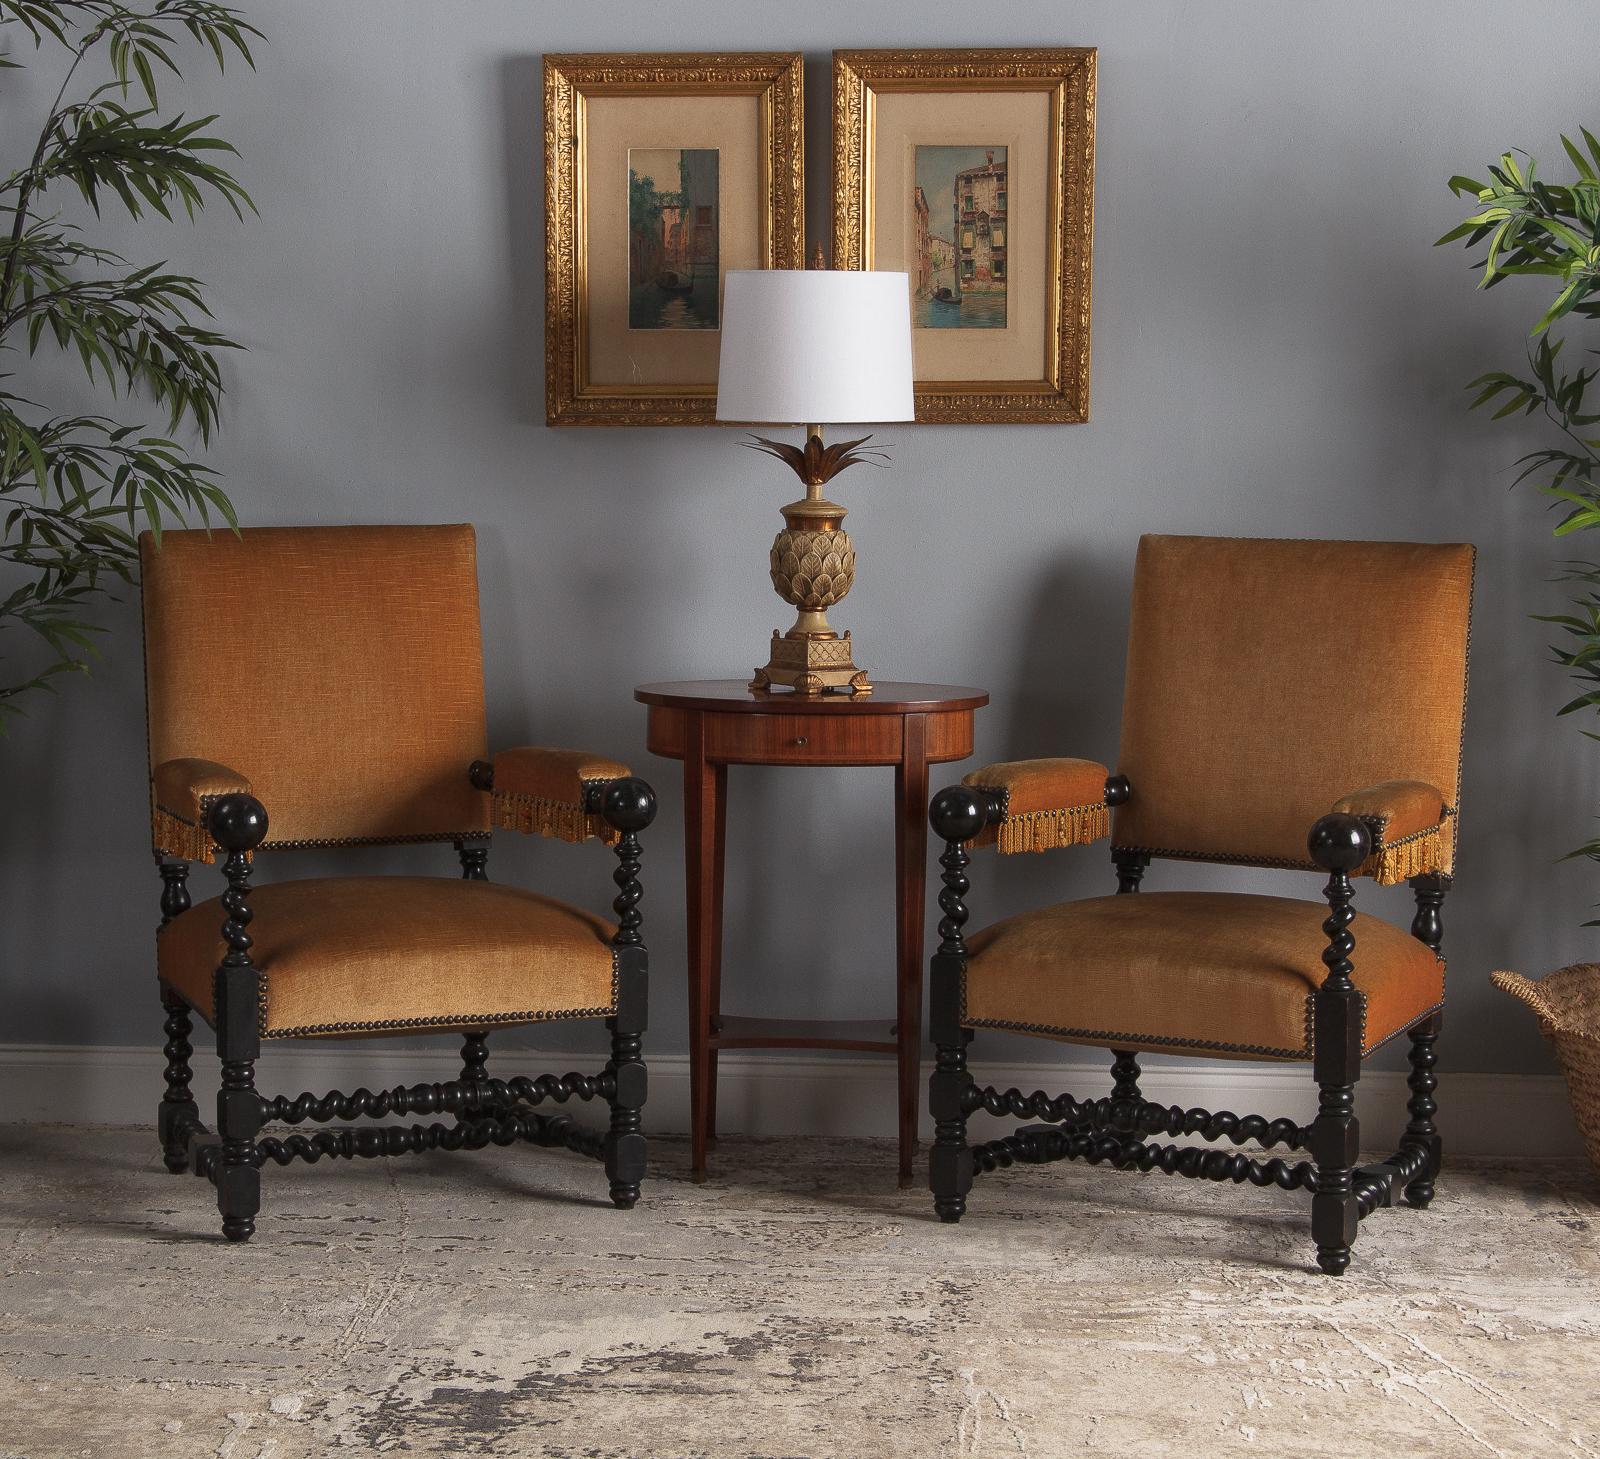 Stylish looking pair of Louis XIII style armchairs that date from the Napoleon period, circa 1870s. The ebonized pear wood frame features baluster and spiral legs and stretcher. The armrests terminate with a ball. The upholstery is velvet in gold